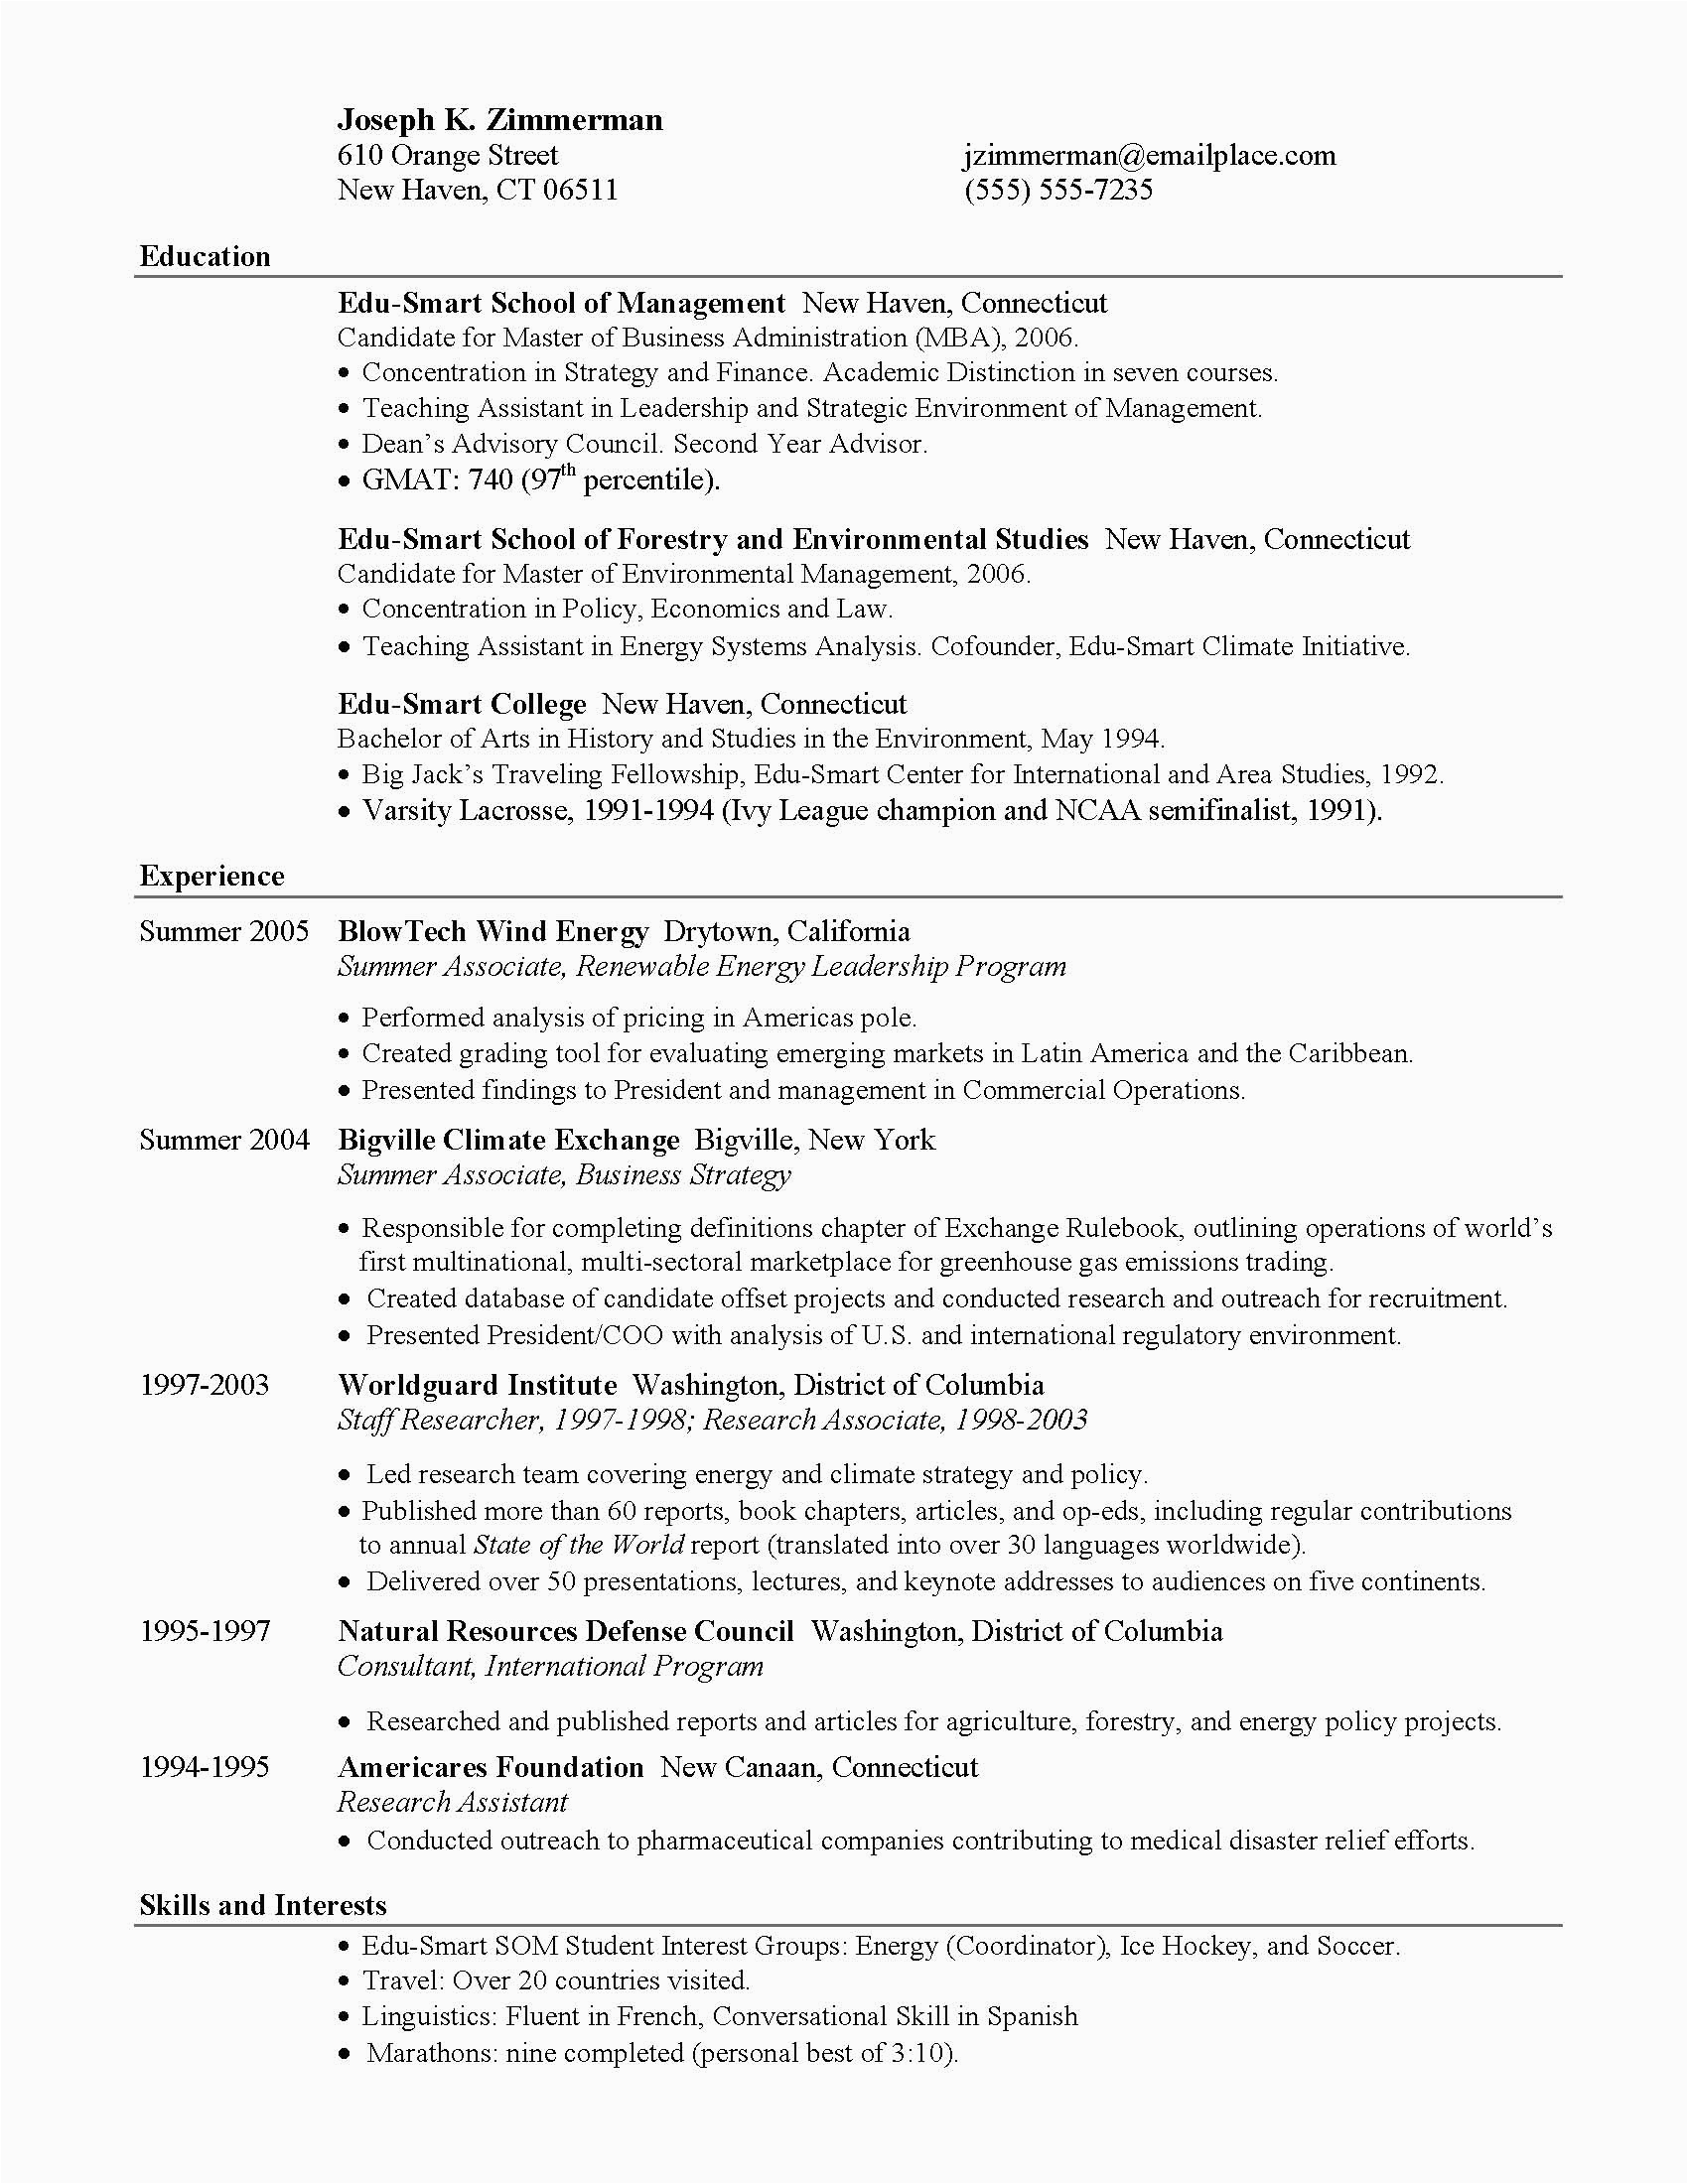 Sample Resume with associates Degree Listed Global Cv and Curriculum Vitae Services